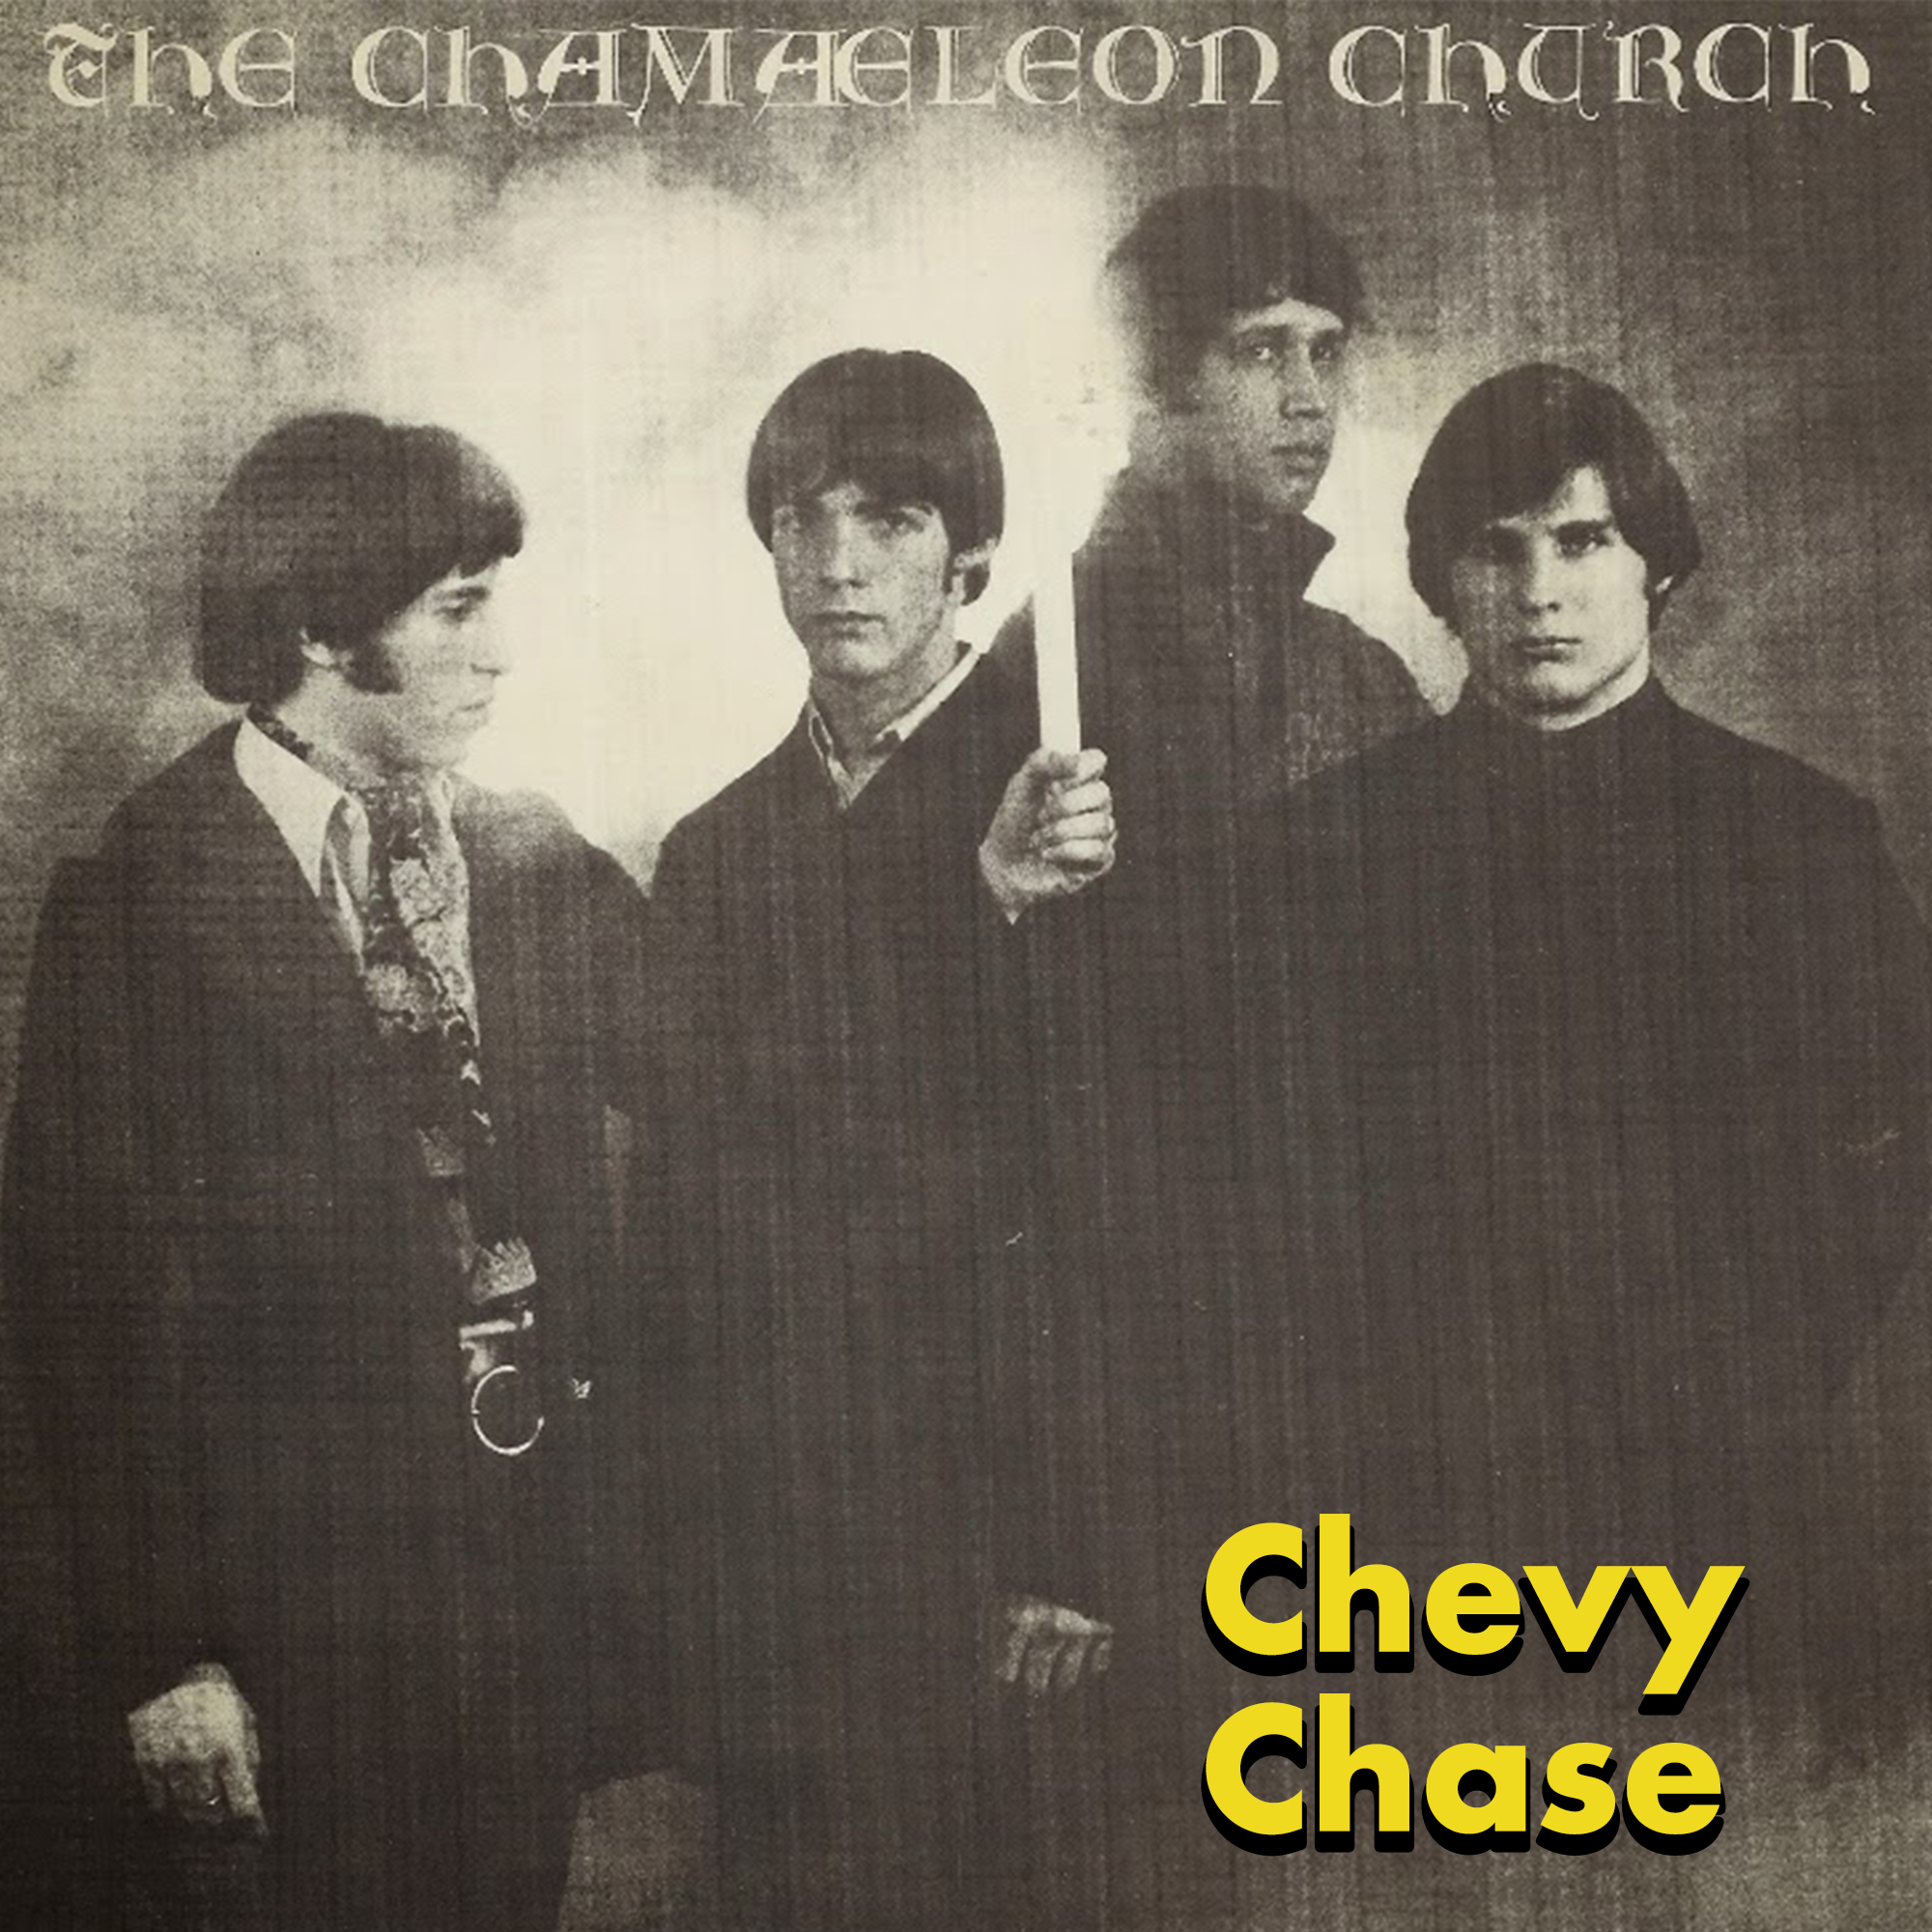 actors in bands - chamaeleon church - The Chamaeleon Church Chevy Chase